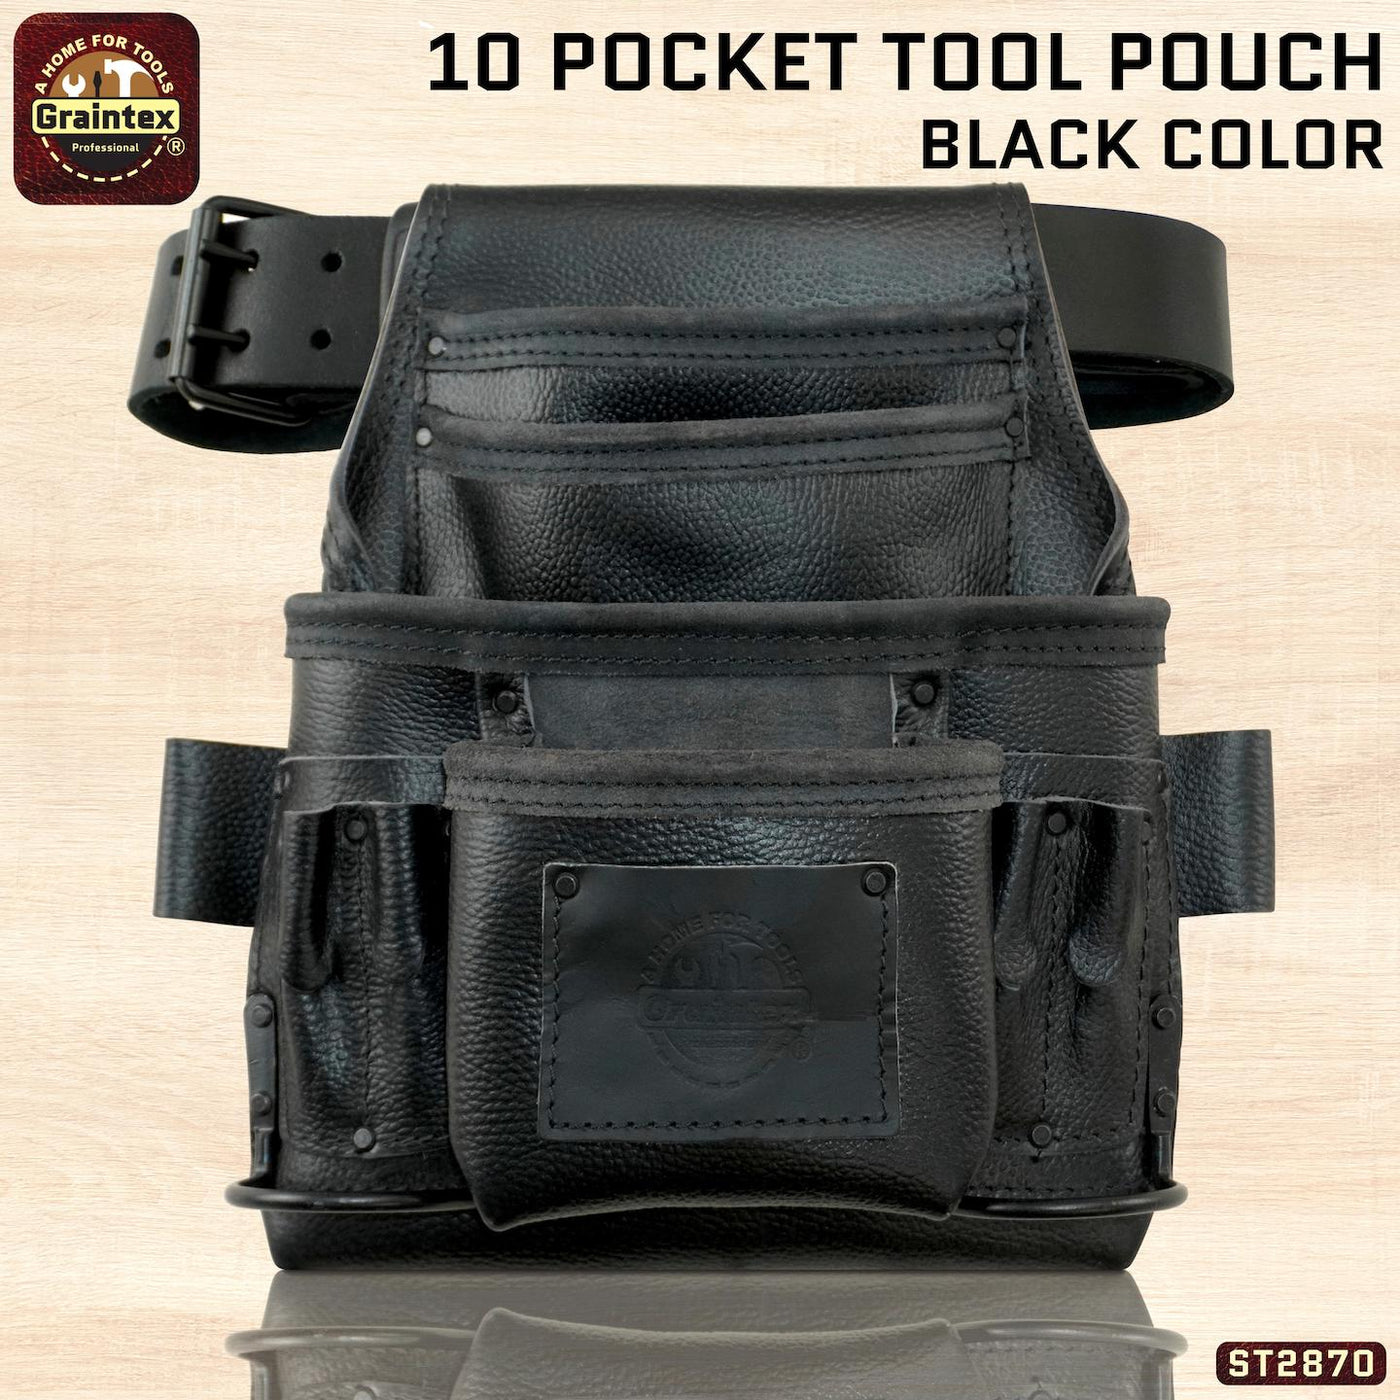 ST2870 :: 10 Pocket Nail & Tool Pouch Black Color RUGGED Top Grain Leather W/2" Leather Belt